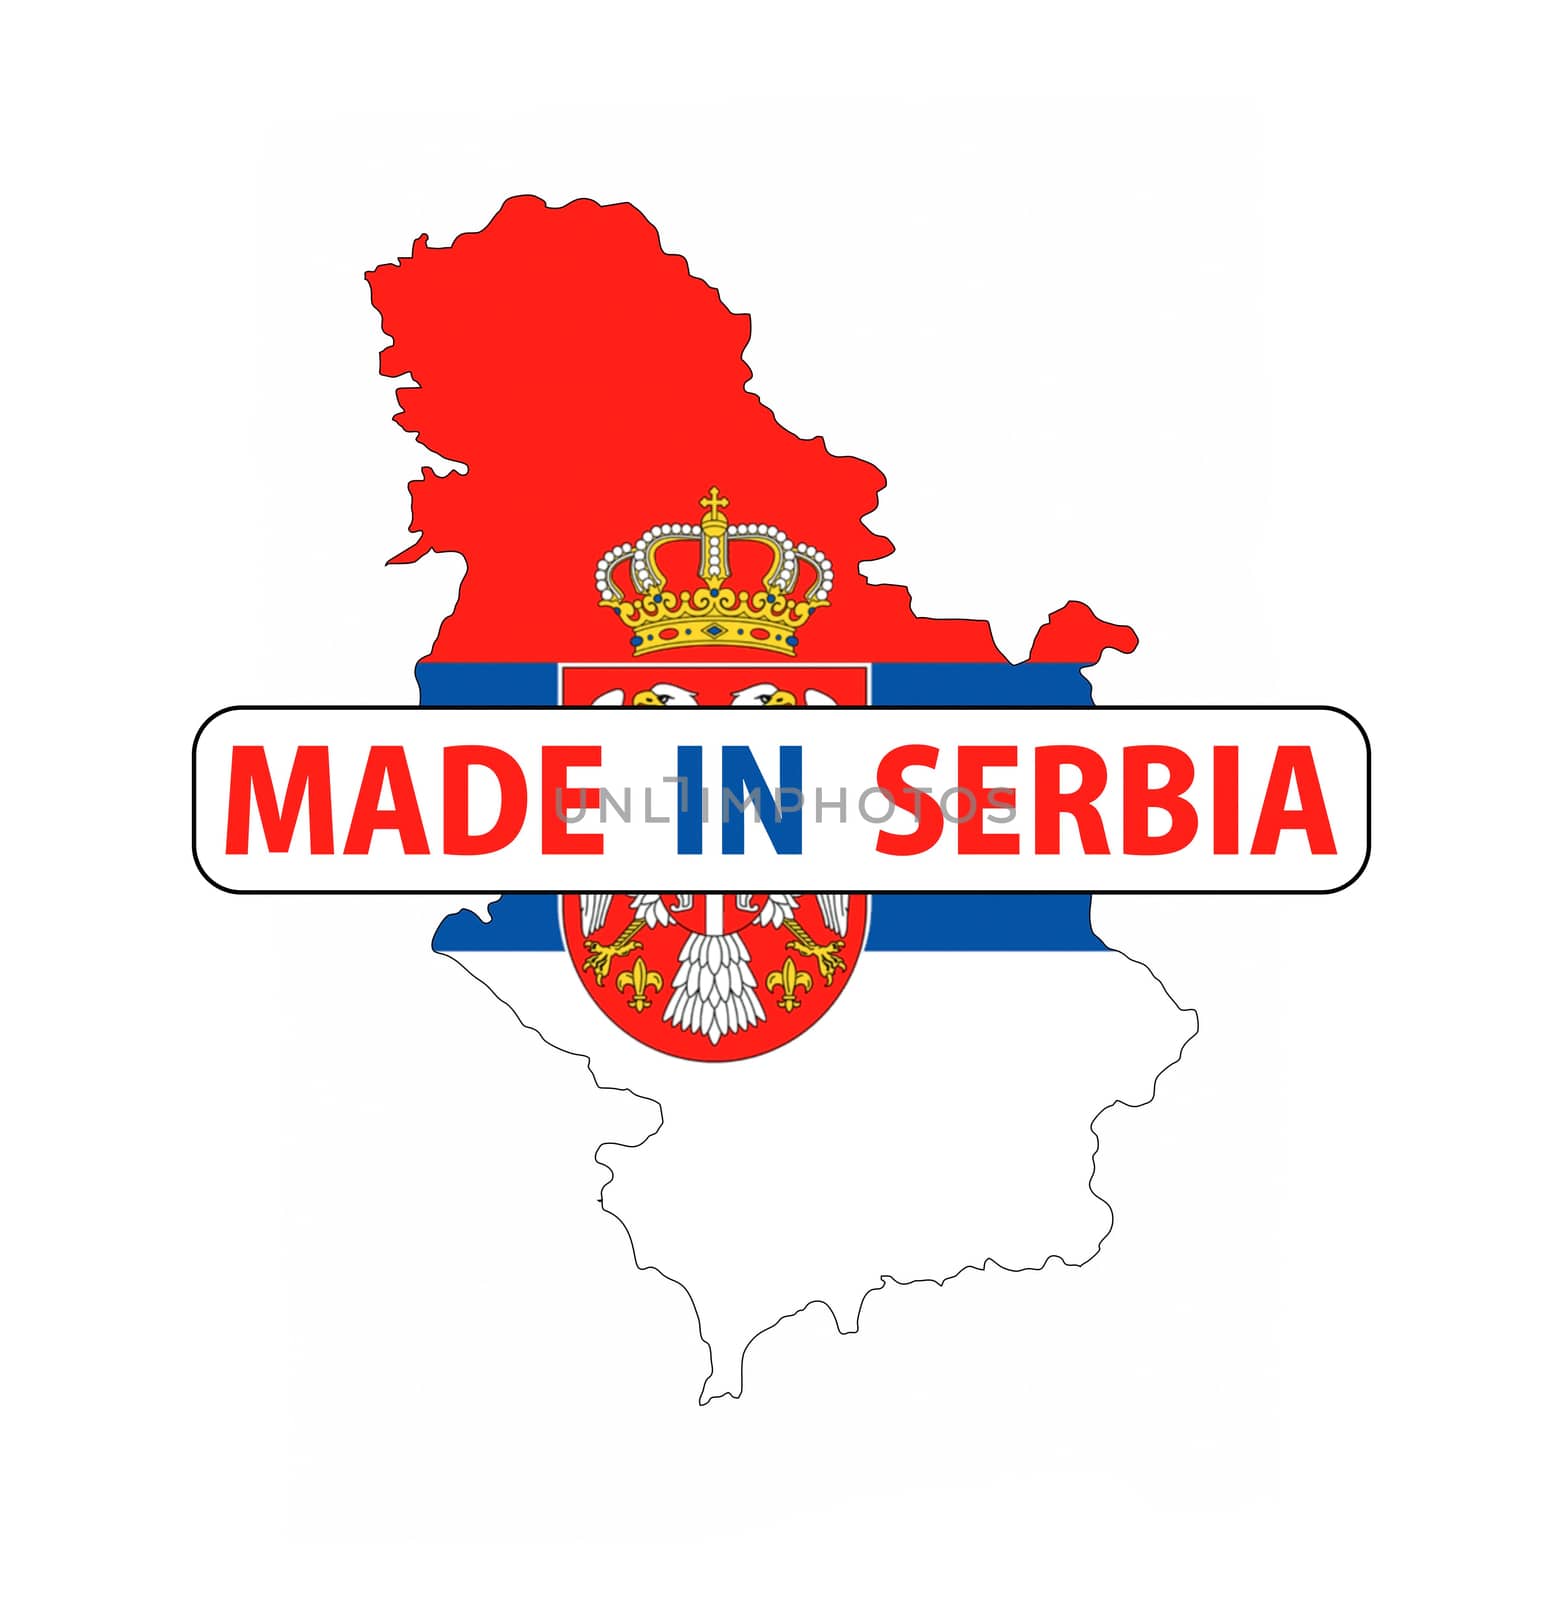 made in serbia by tony4urban